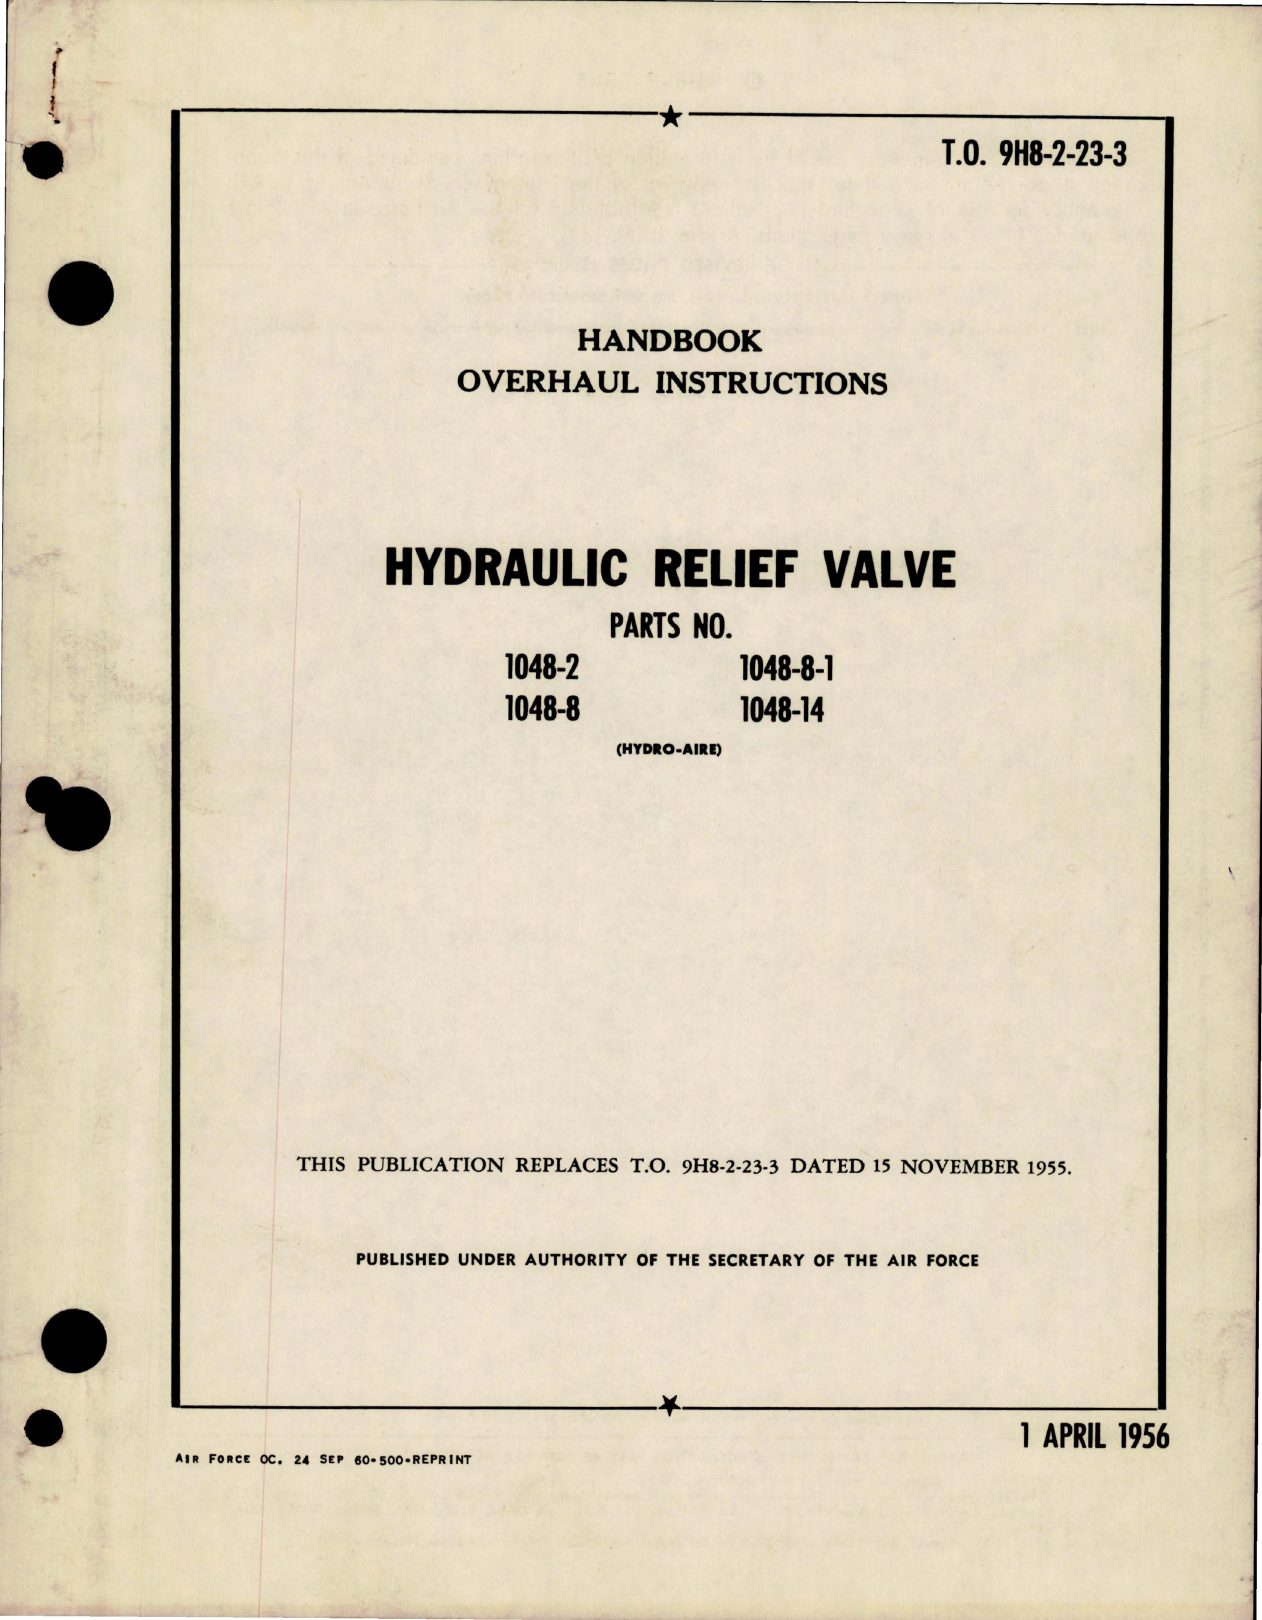 Sample page 1 from AirCorps Library document: Overhaul Instructions for Hydraulic Relief Valve - Parts 1048-2, 1048-8, 1048-8-1 and 1048-14 